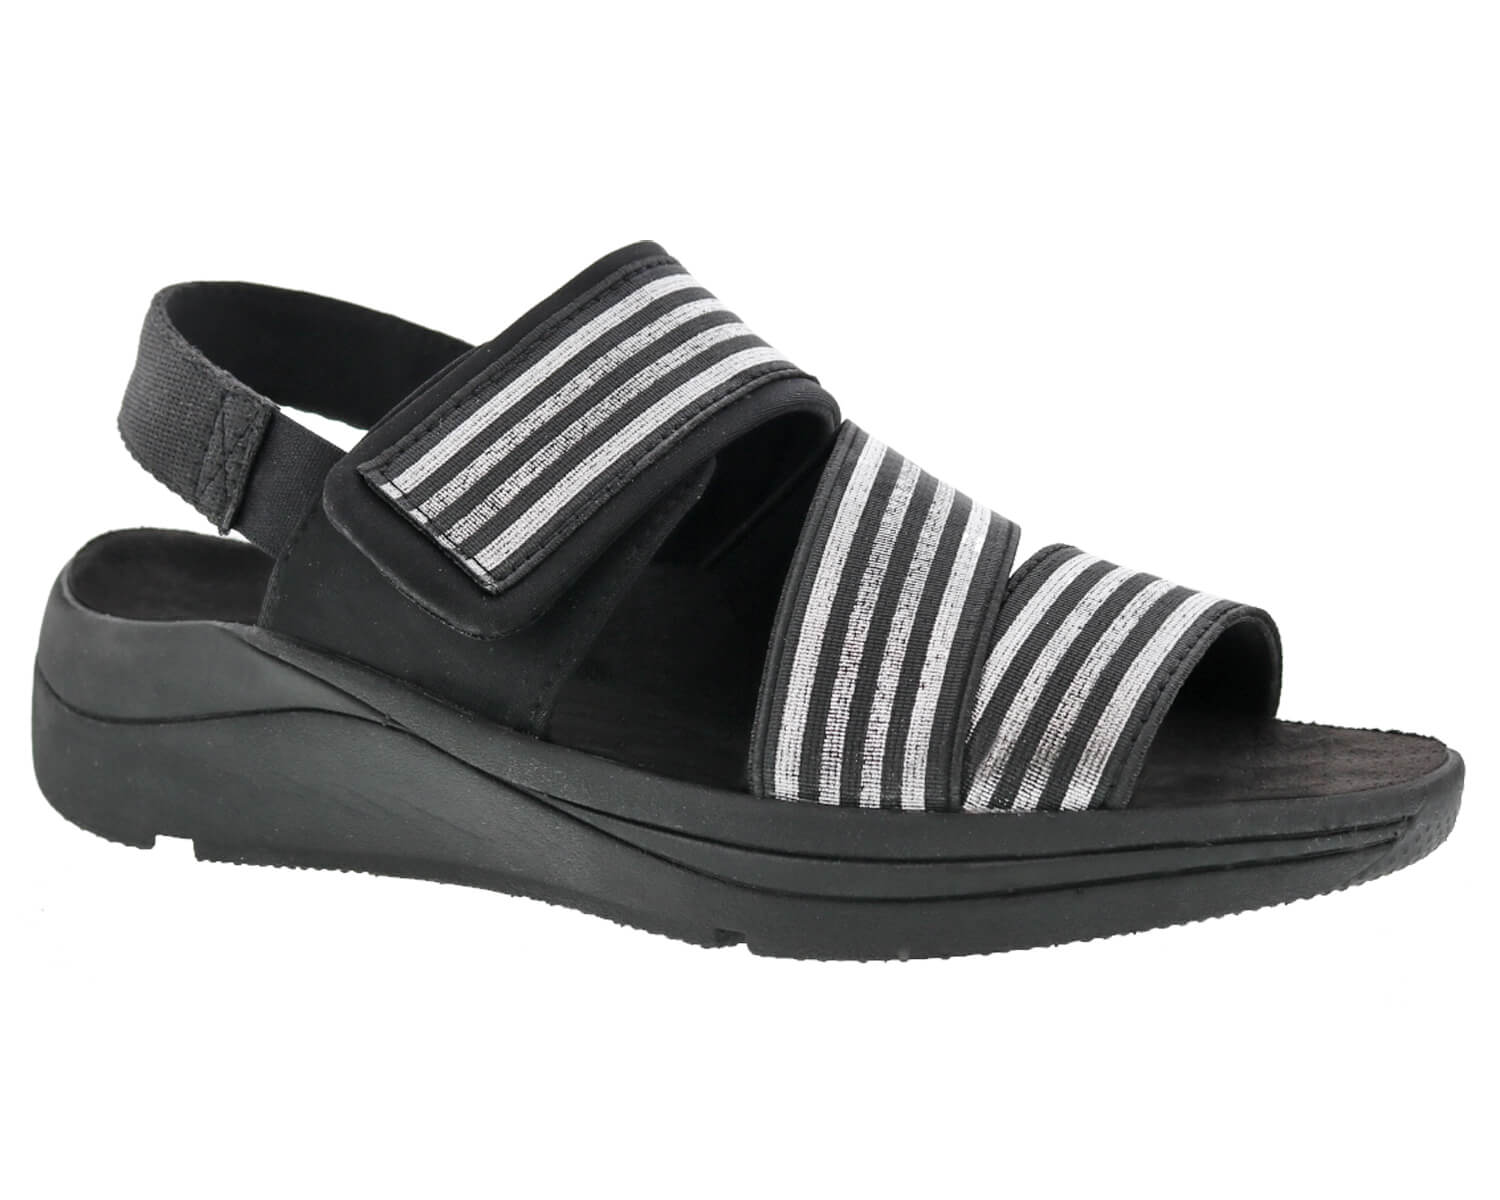 Drew Shoes Sutton 17201 Women's Casual Sandal - Comfort Therapeutic Sandal - Removable Footbed